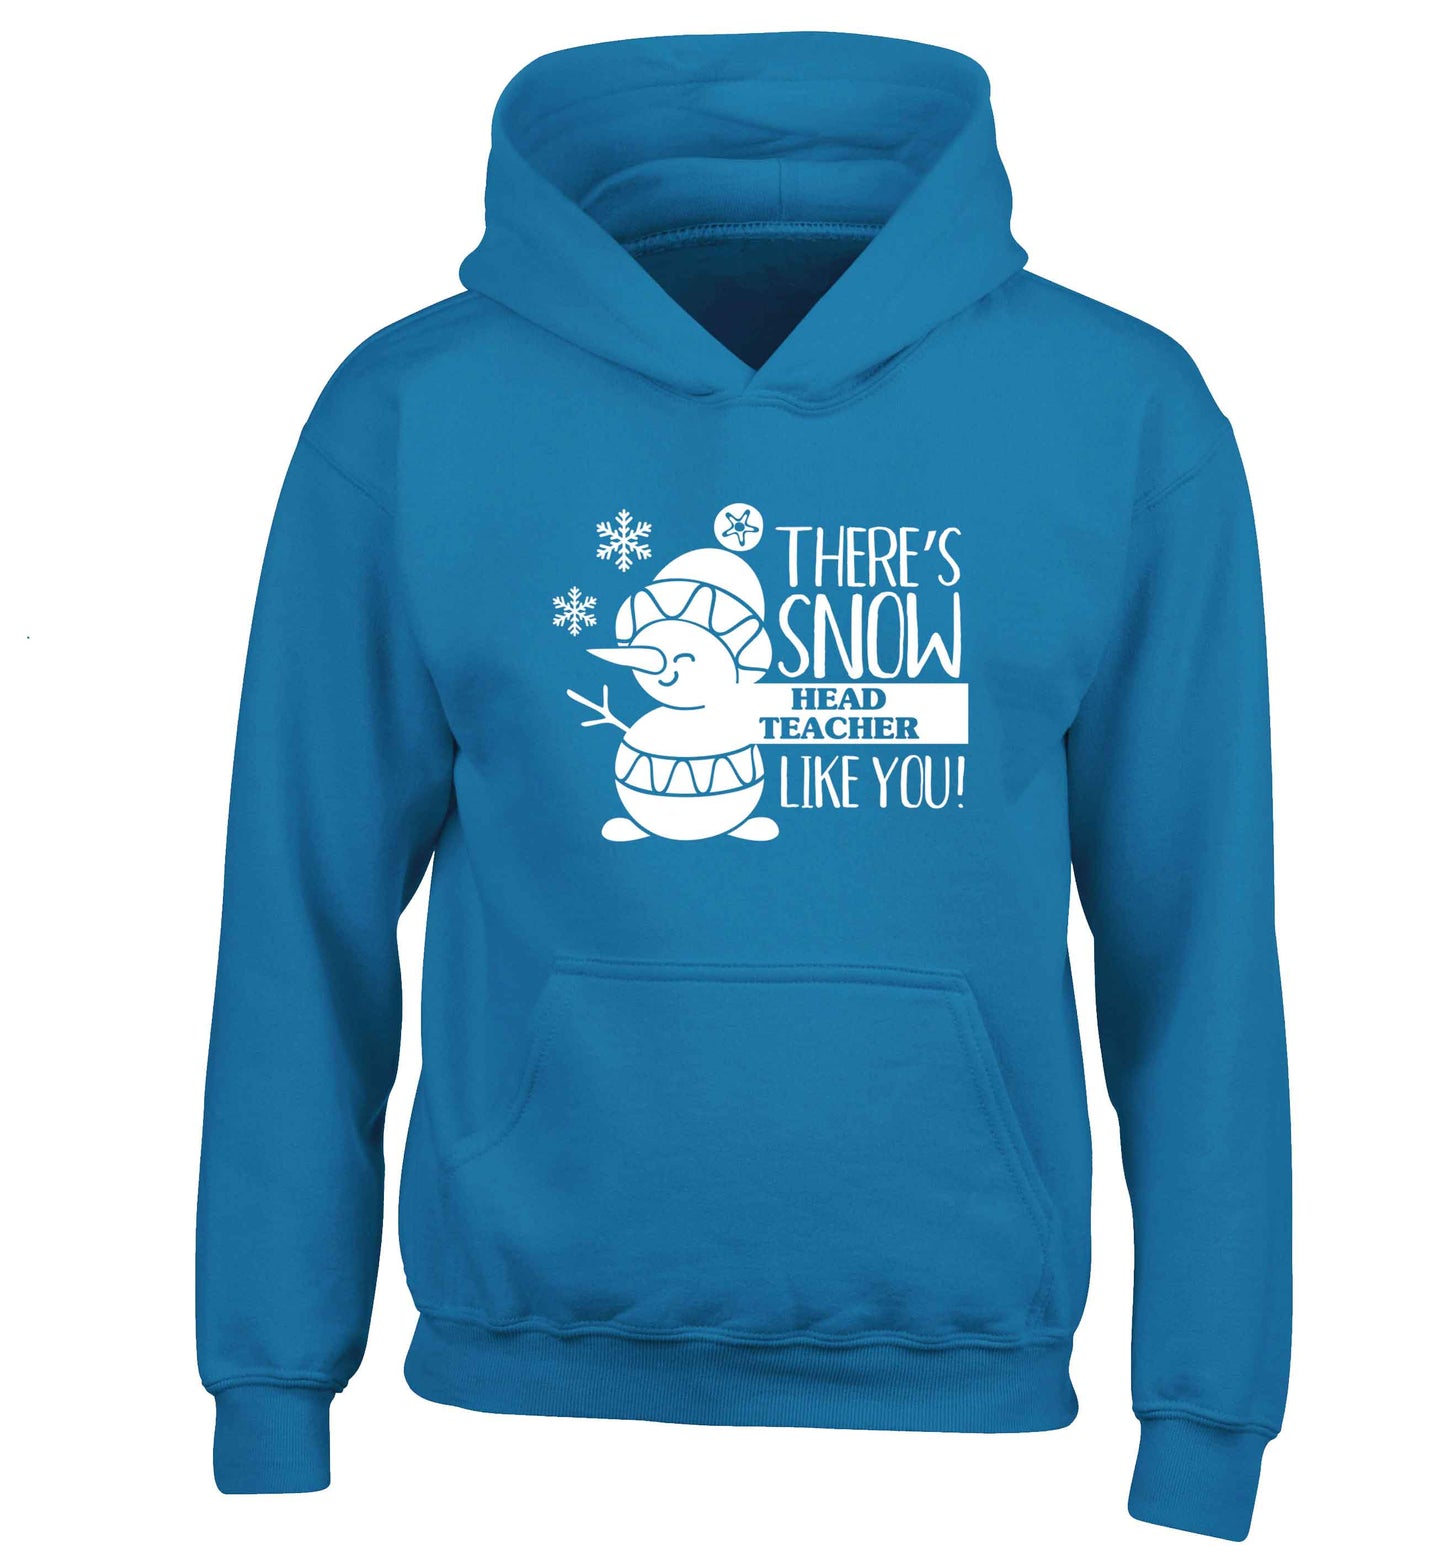 There's snow head teacher like you children's blue hoodie 12-13 Years